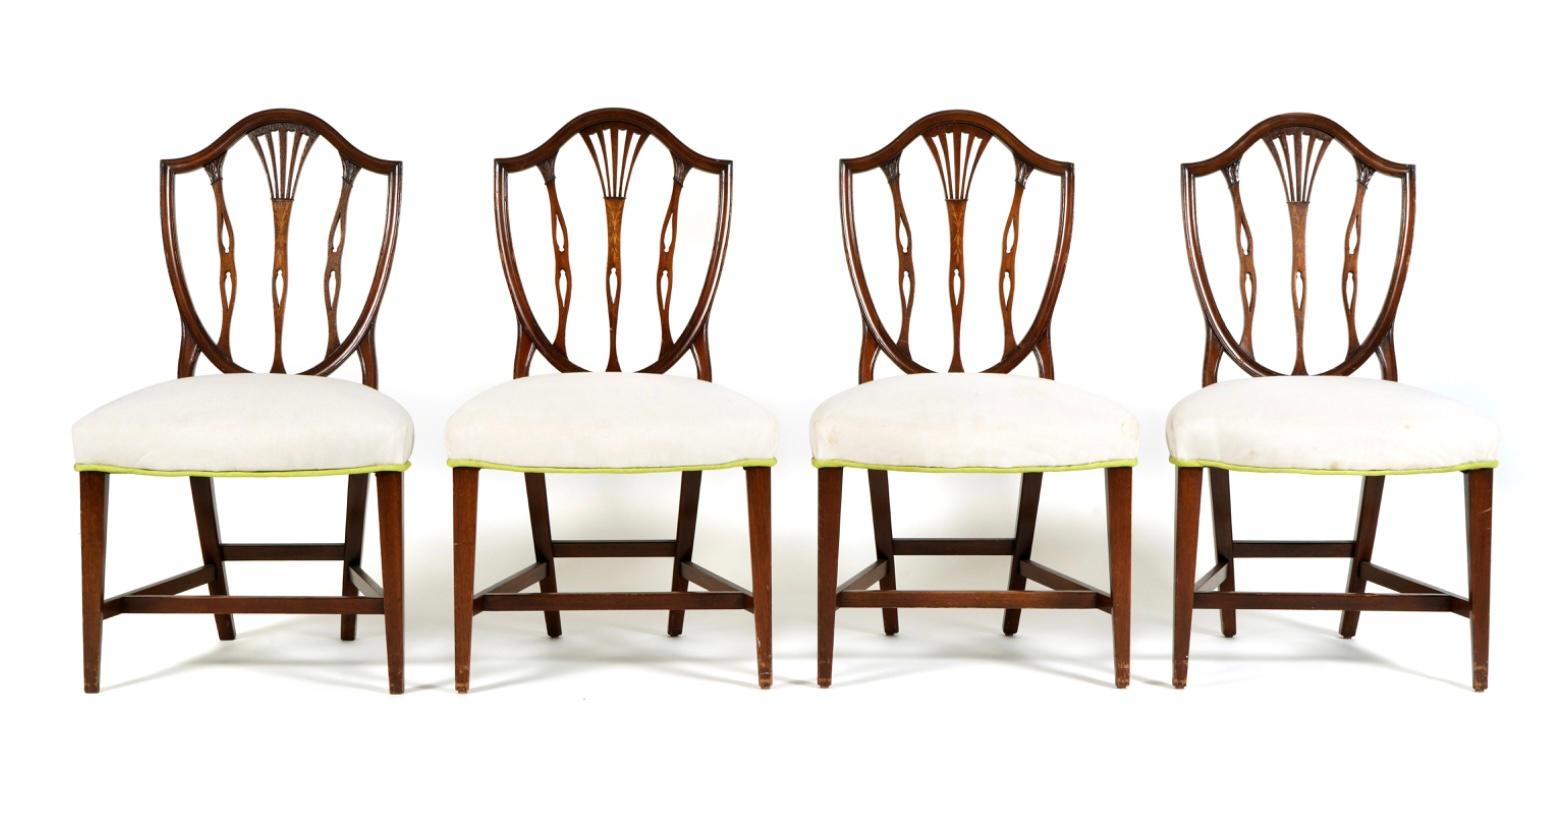 Set of eight late 19th century Hepplewhite dining chairs, two chairs with arms and six side chairs. Chairs are carved and molded with American shield backs with center floral inlay. White linen upholstery. Purchased at Sotheby's in 1977. 